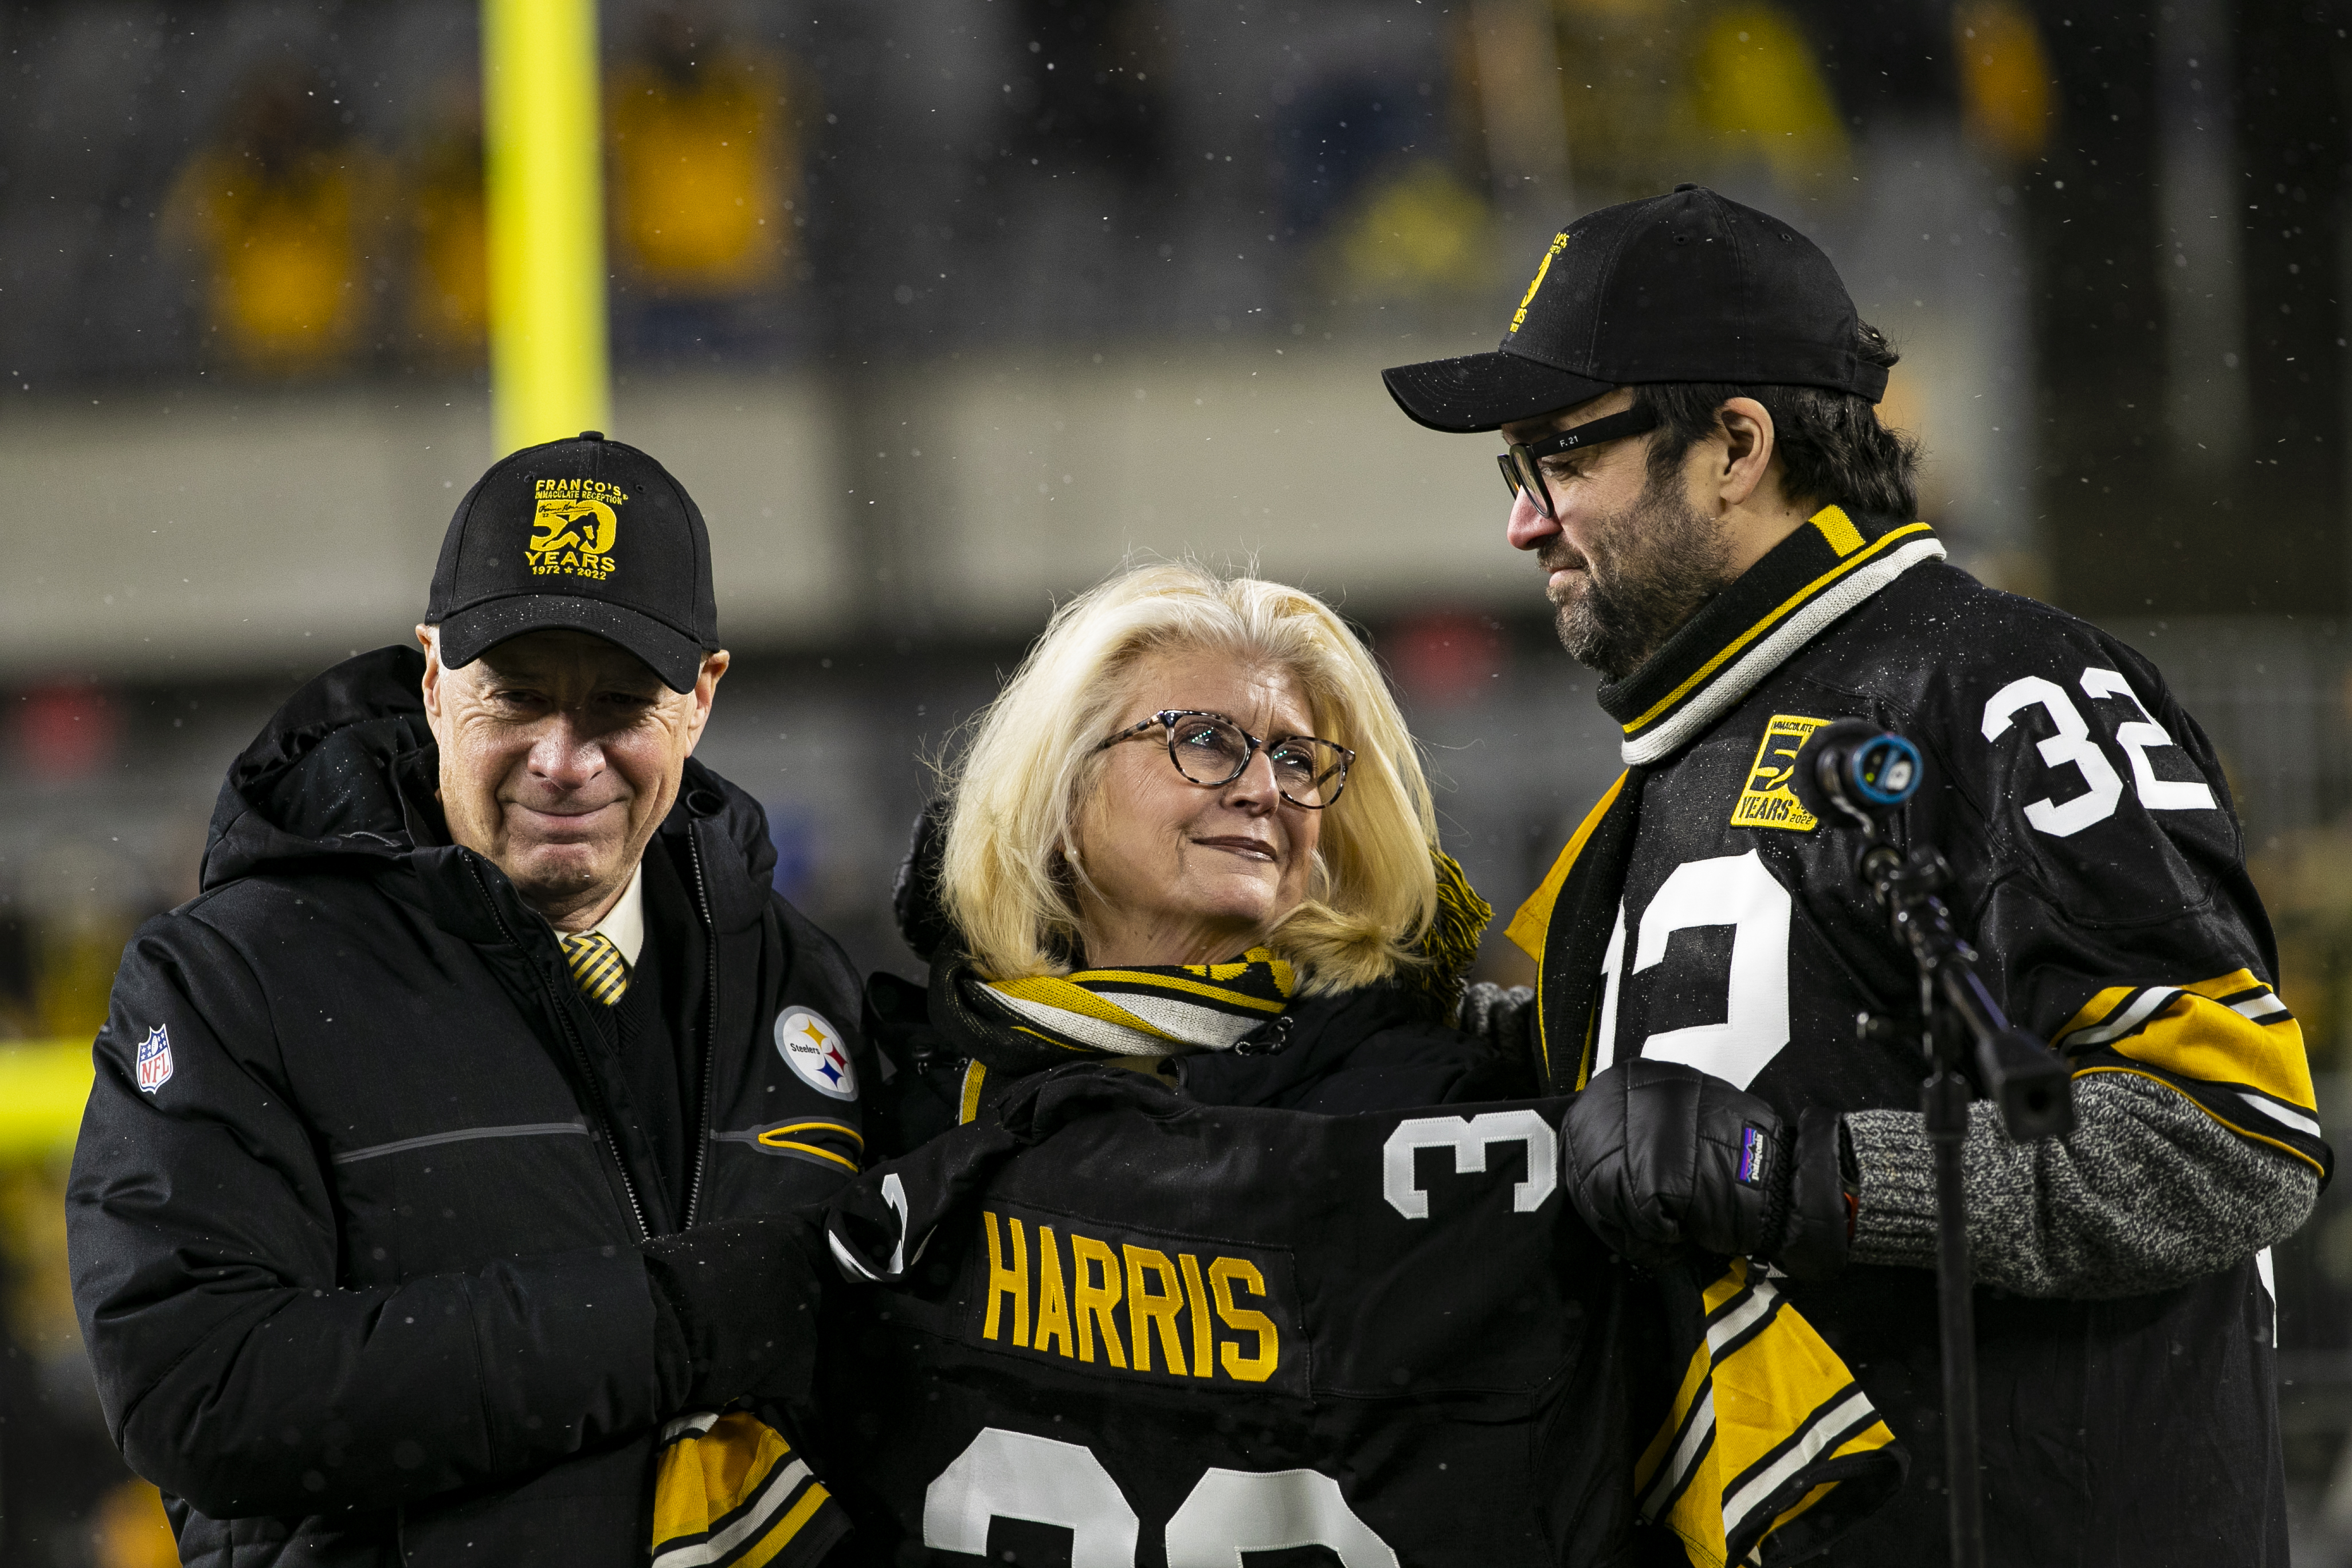 Art Rooney II presents Dana Dokmanovich and her son Franco "Dok" Dokmanovich Harris with Franco Harris's jersey during the retirement ceremony at Acrisure Stadium on December 24, 2022, in Pittsburgh, Pennsylvania. | Source: Getty Images